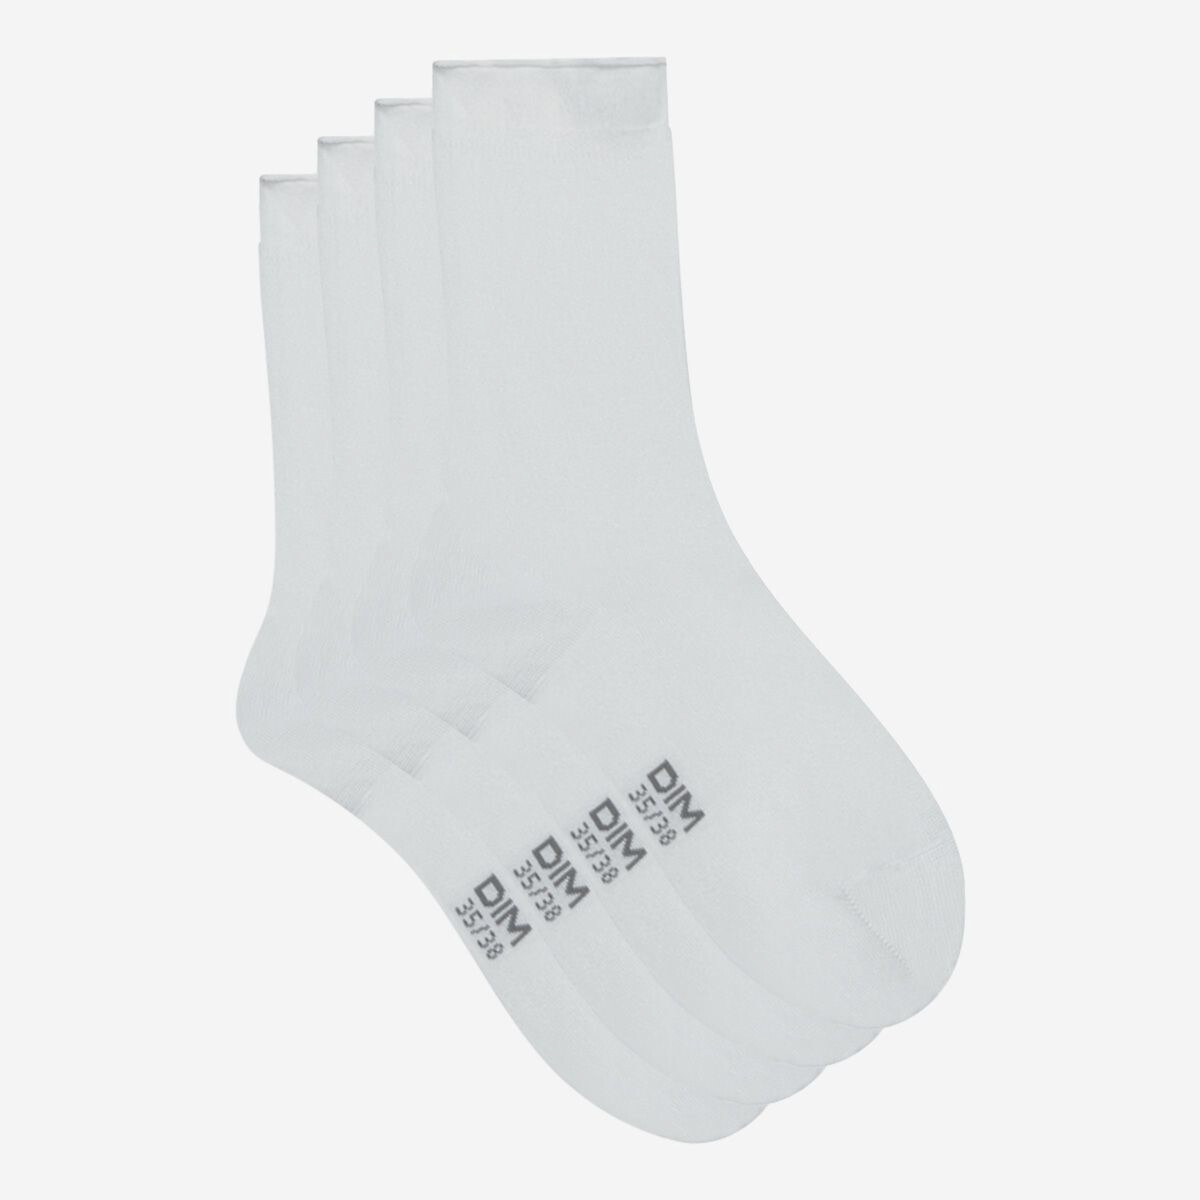 Image of Pack of 2 Pairs of Crew Socks